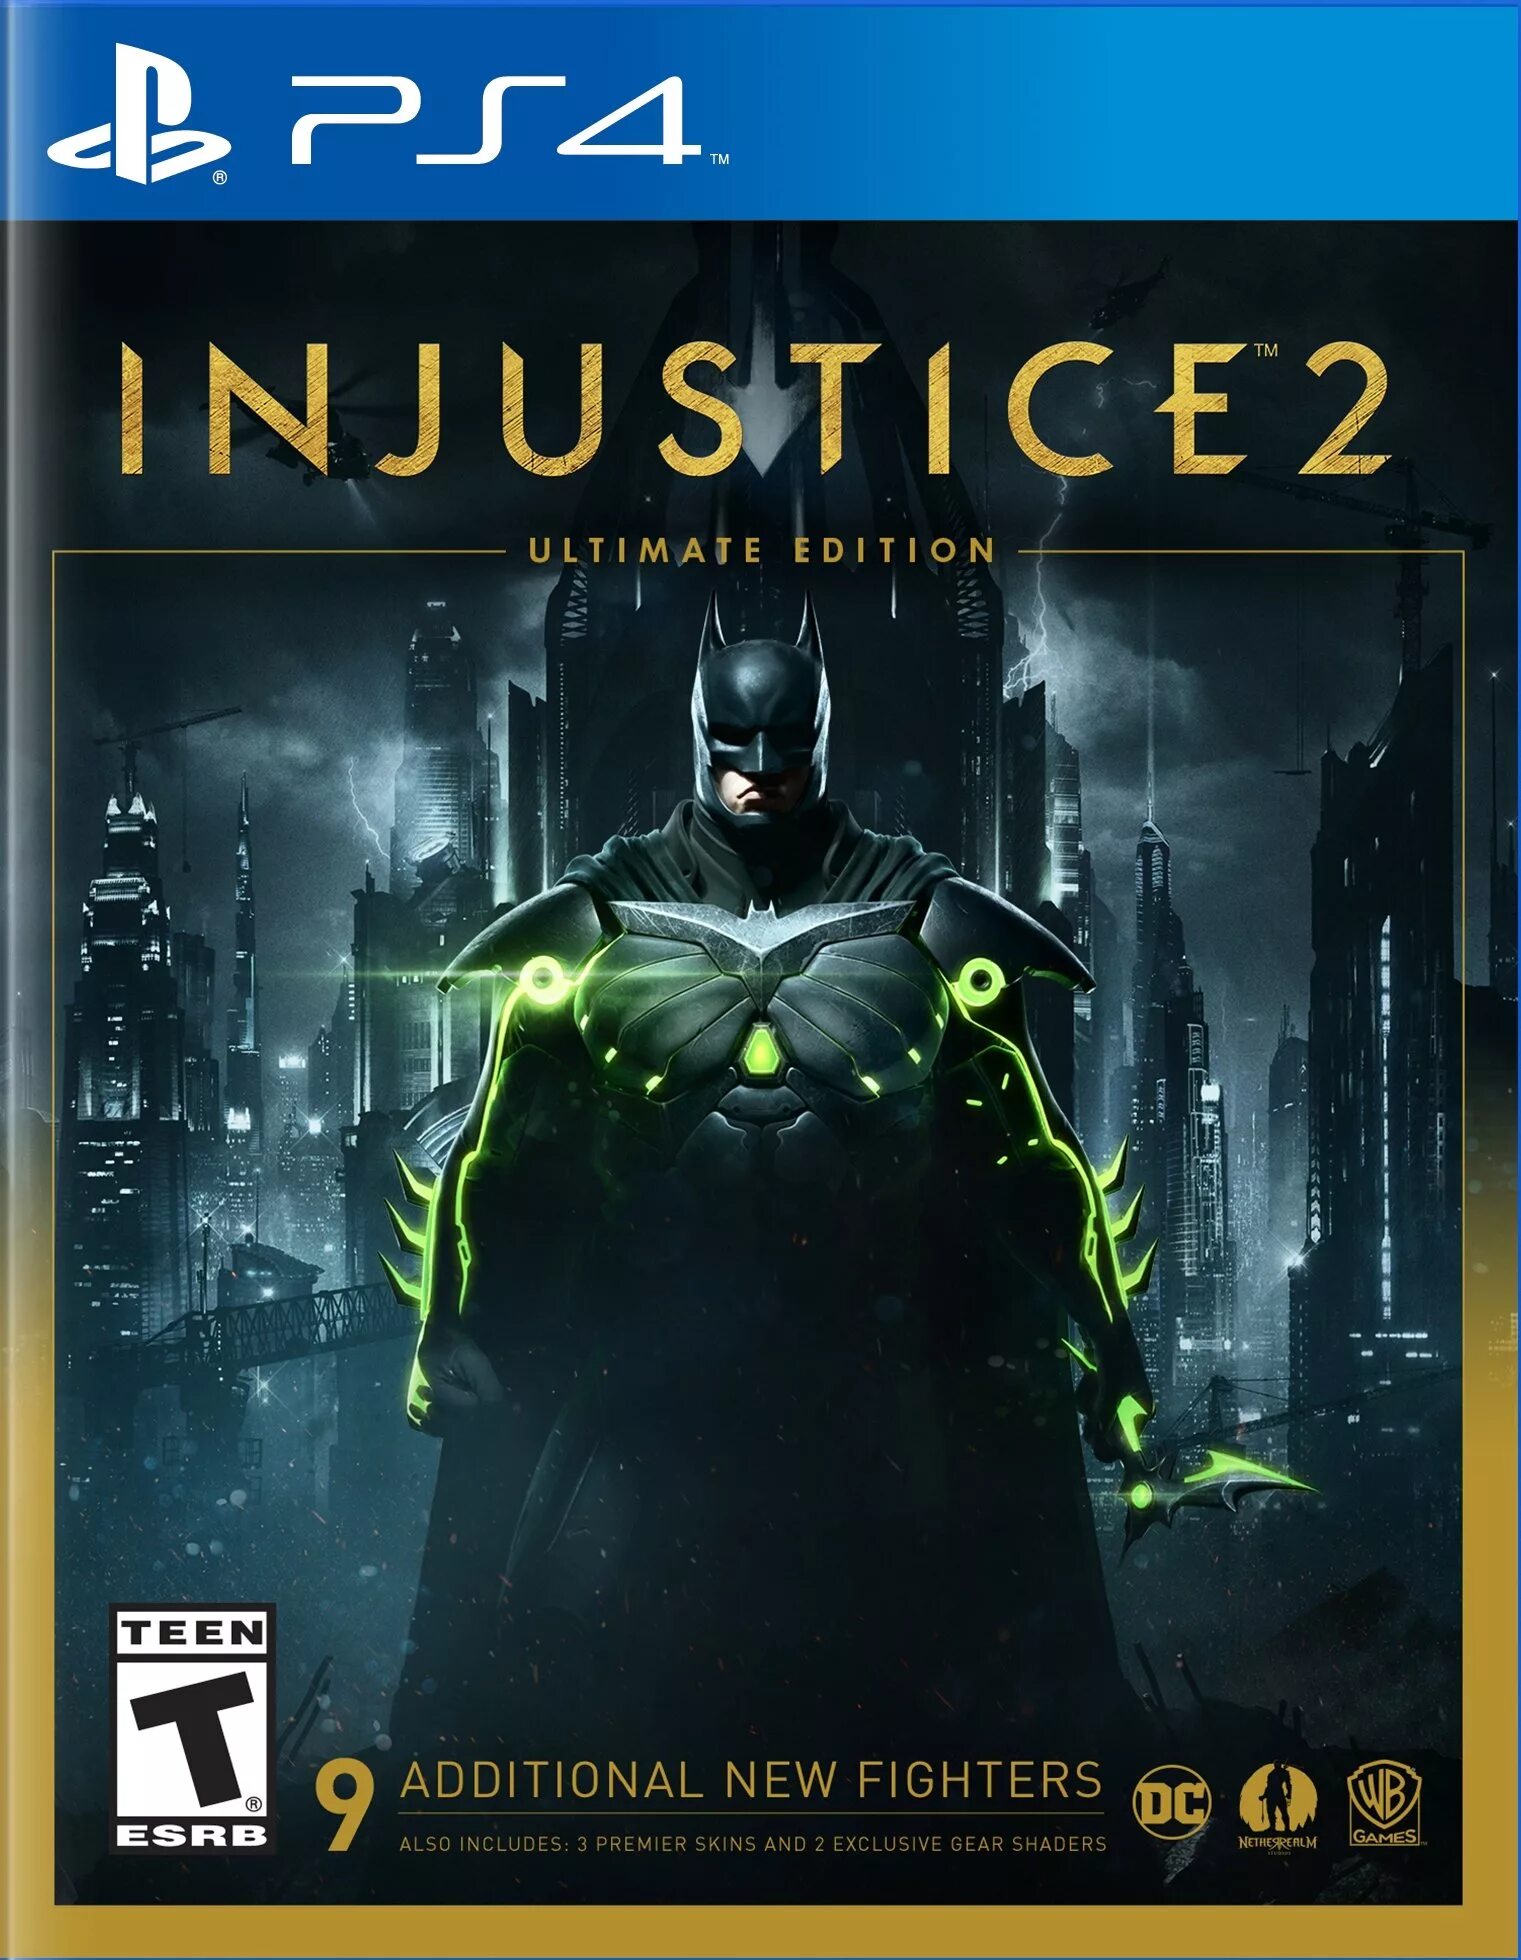 Ps4 ultimate edition. Инджастис 2 ps4. Инджастис 2 пс4. Injustice 2 (ps4). Injustice 2 на PLAYSTATION 3.